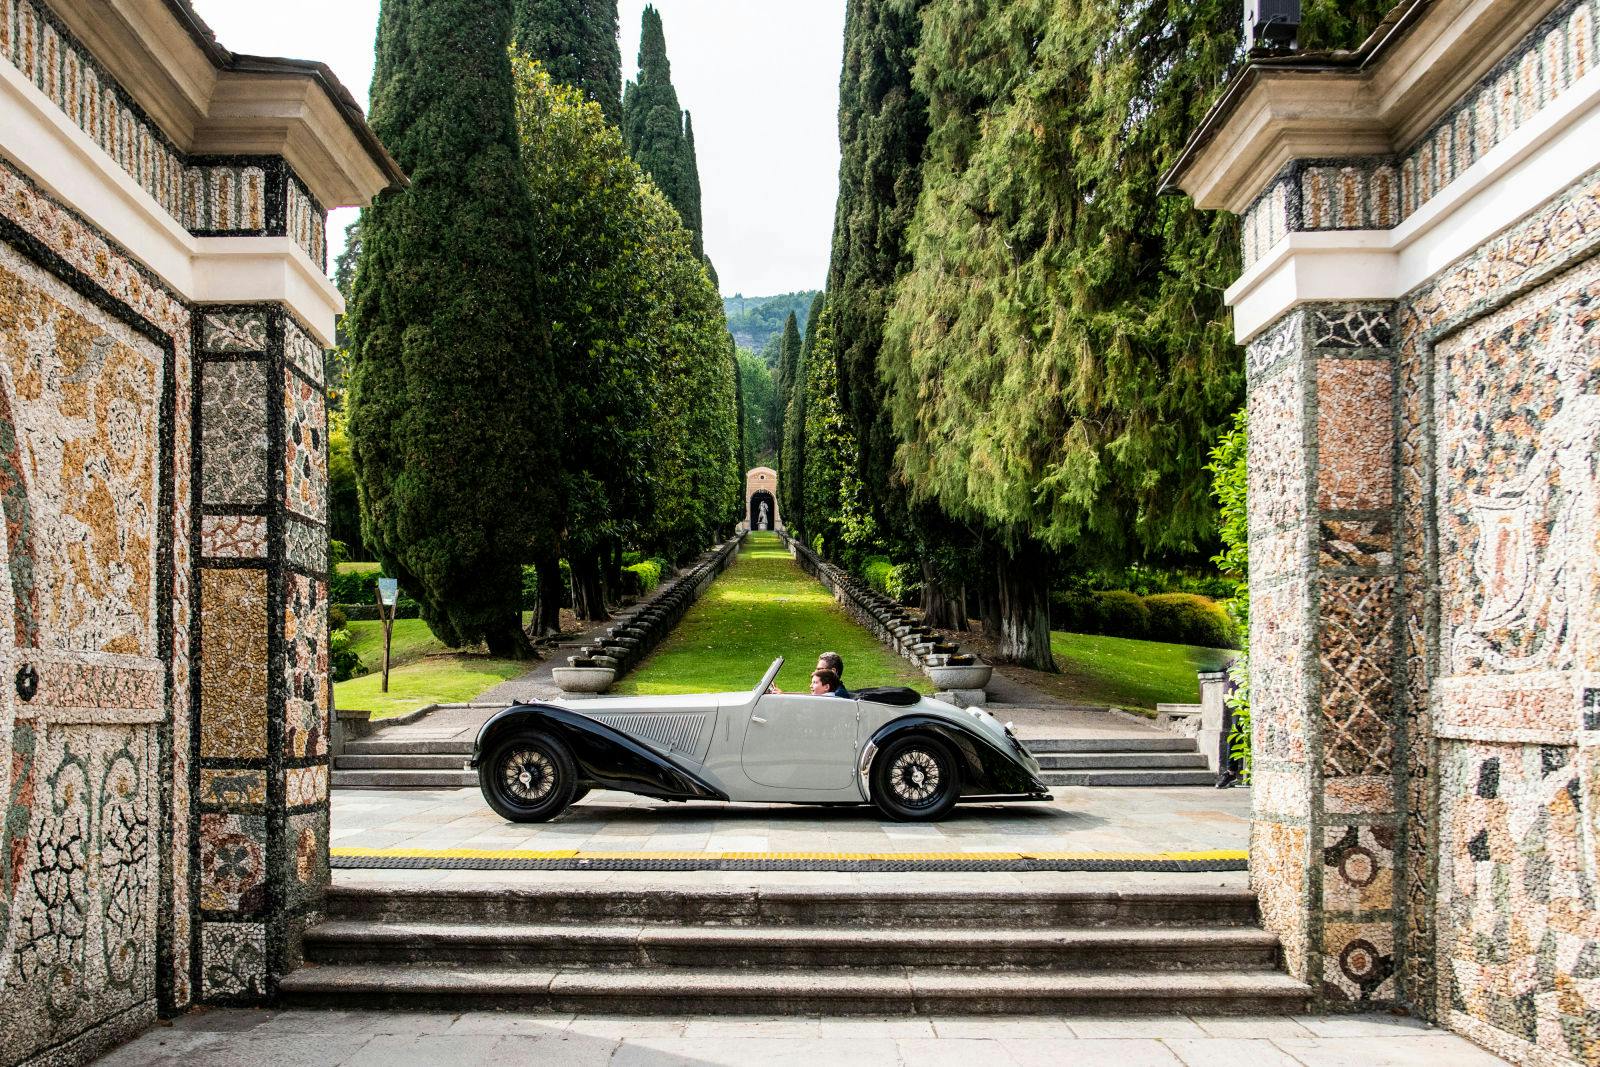 The Bugatti Type 57S Vanvooren Cabriolet has been named ‘Best of Show’ at the 2022 Concorso d’Eleganza.